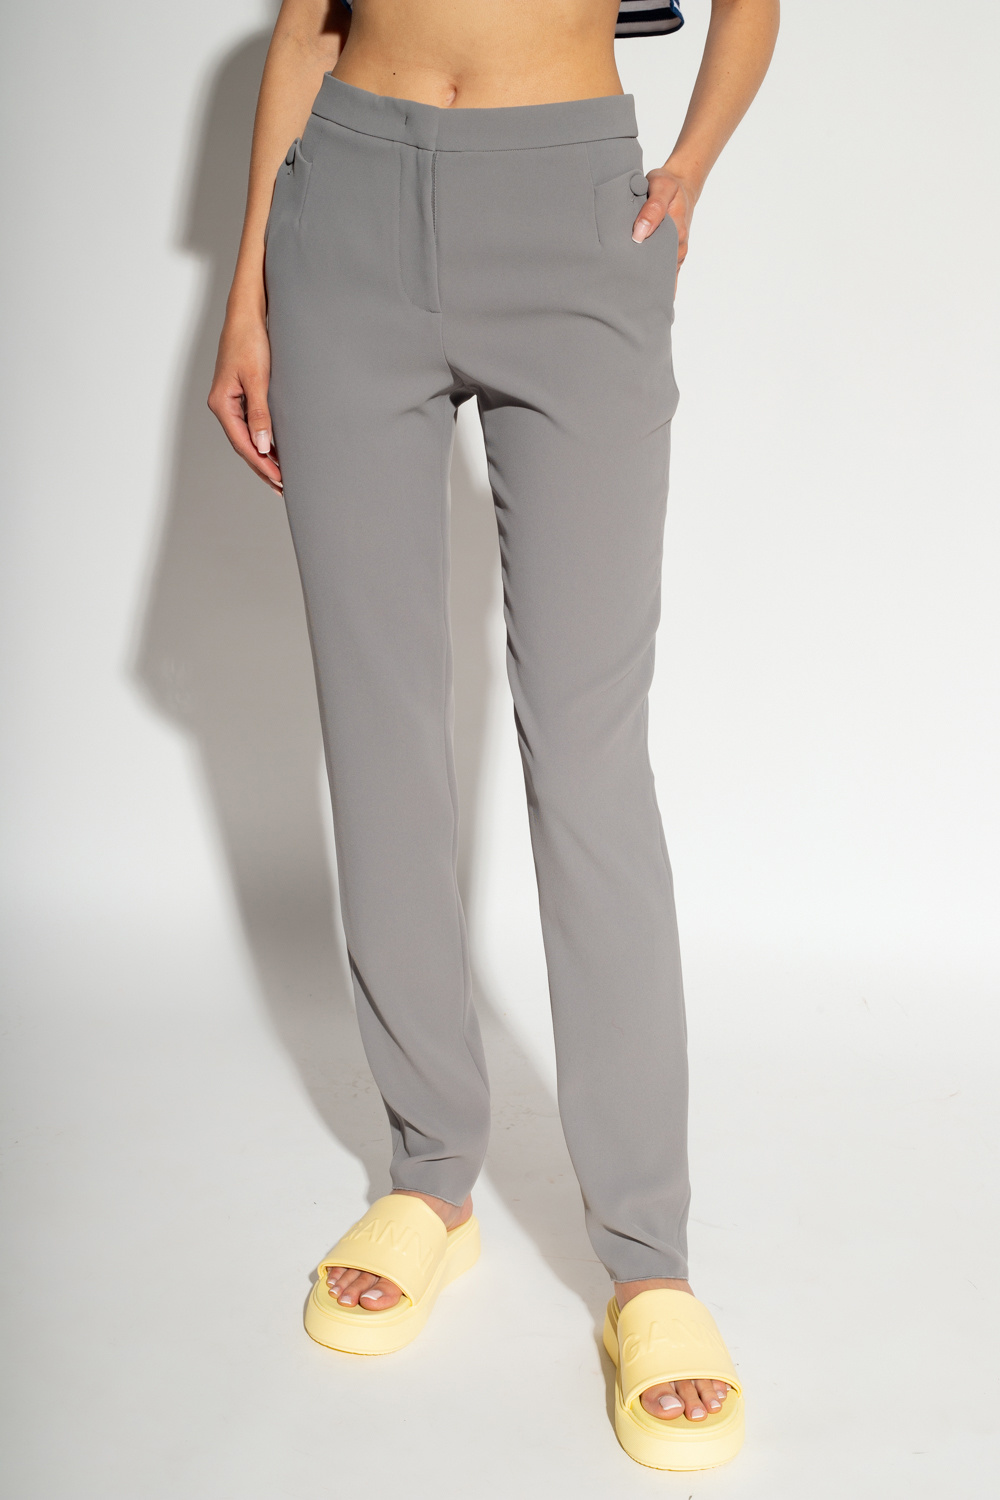 Emporio Armani Tapered Slides trousers